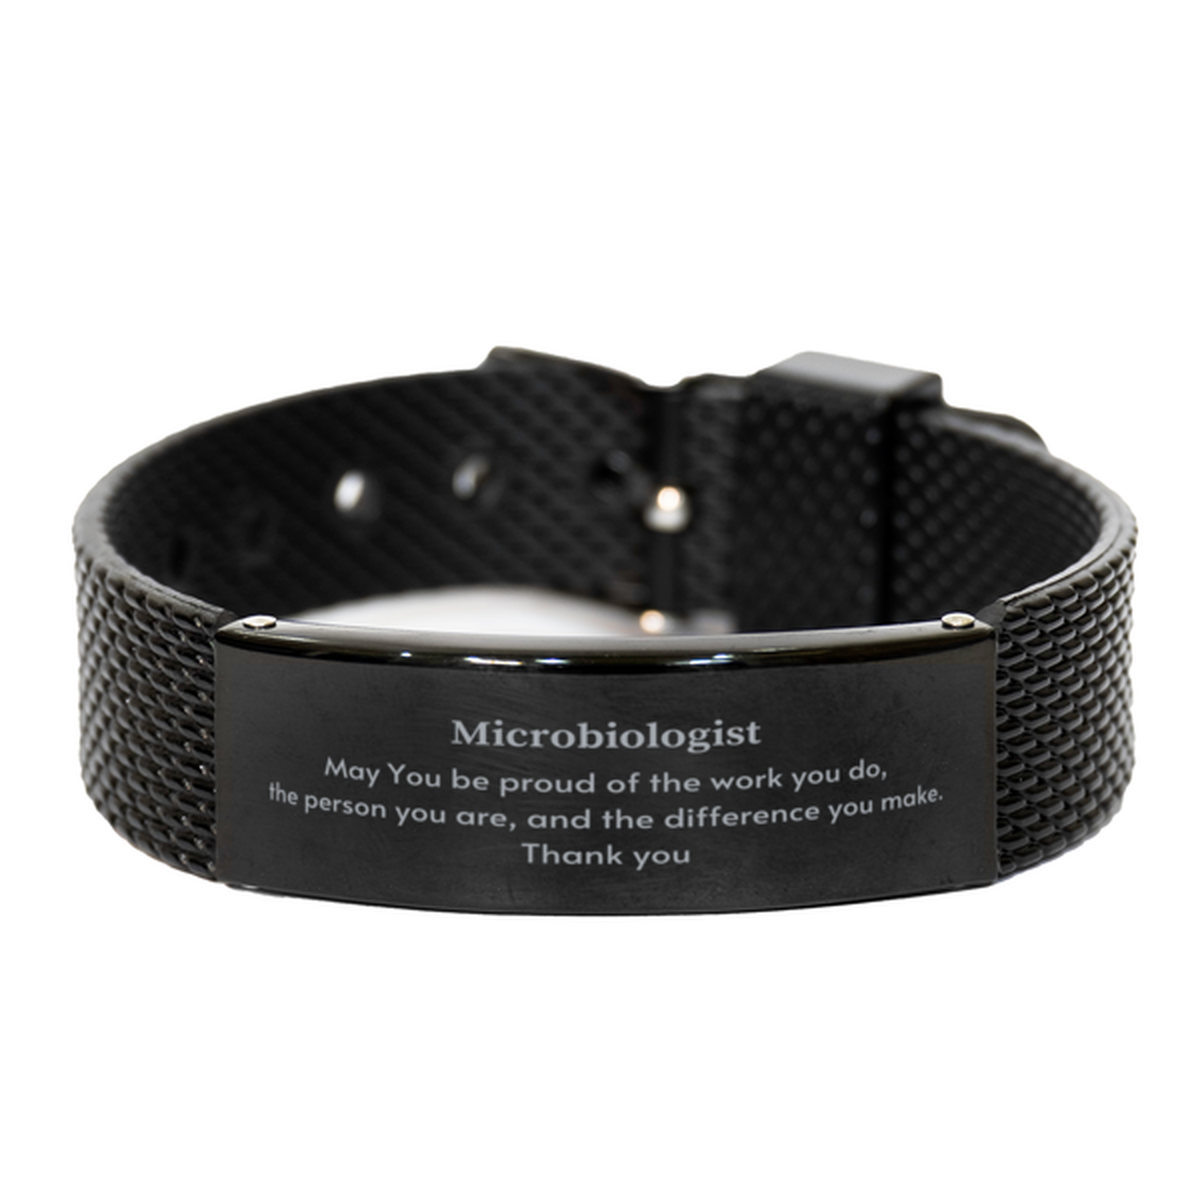 Heartwarming Black Shark Mesh Bracelet Retirement Coworkers Gifts for Microbiologist, Microbiologist May You be proud of the work you do, the person you are Gifts for Boss Men Women Friends